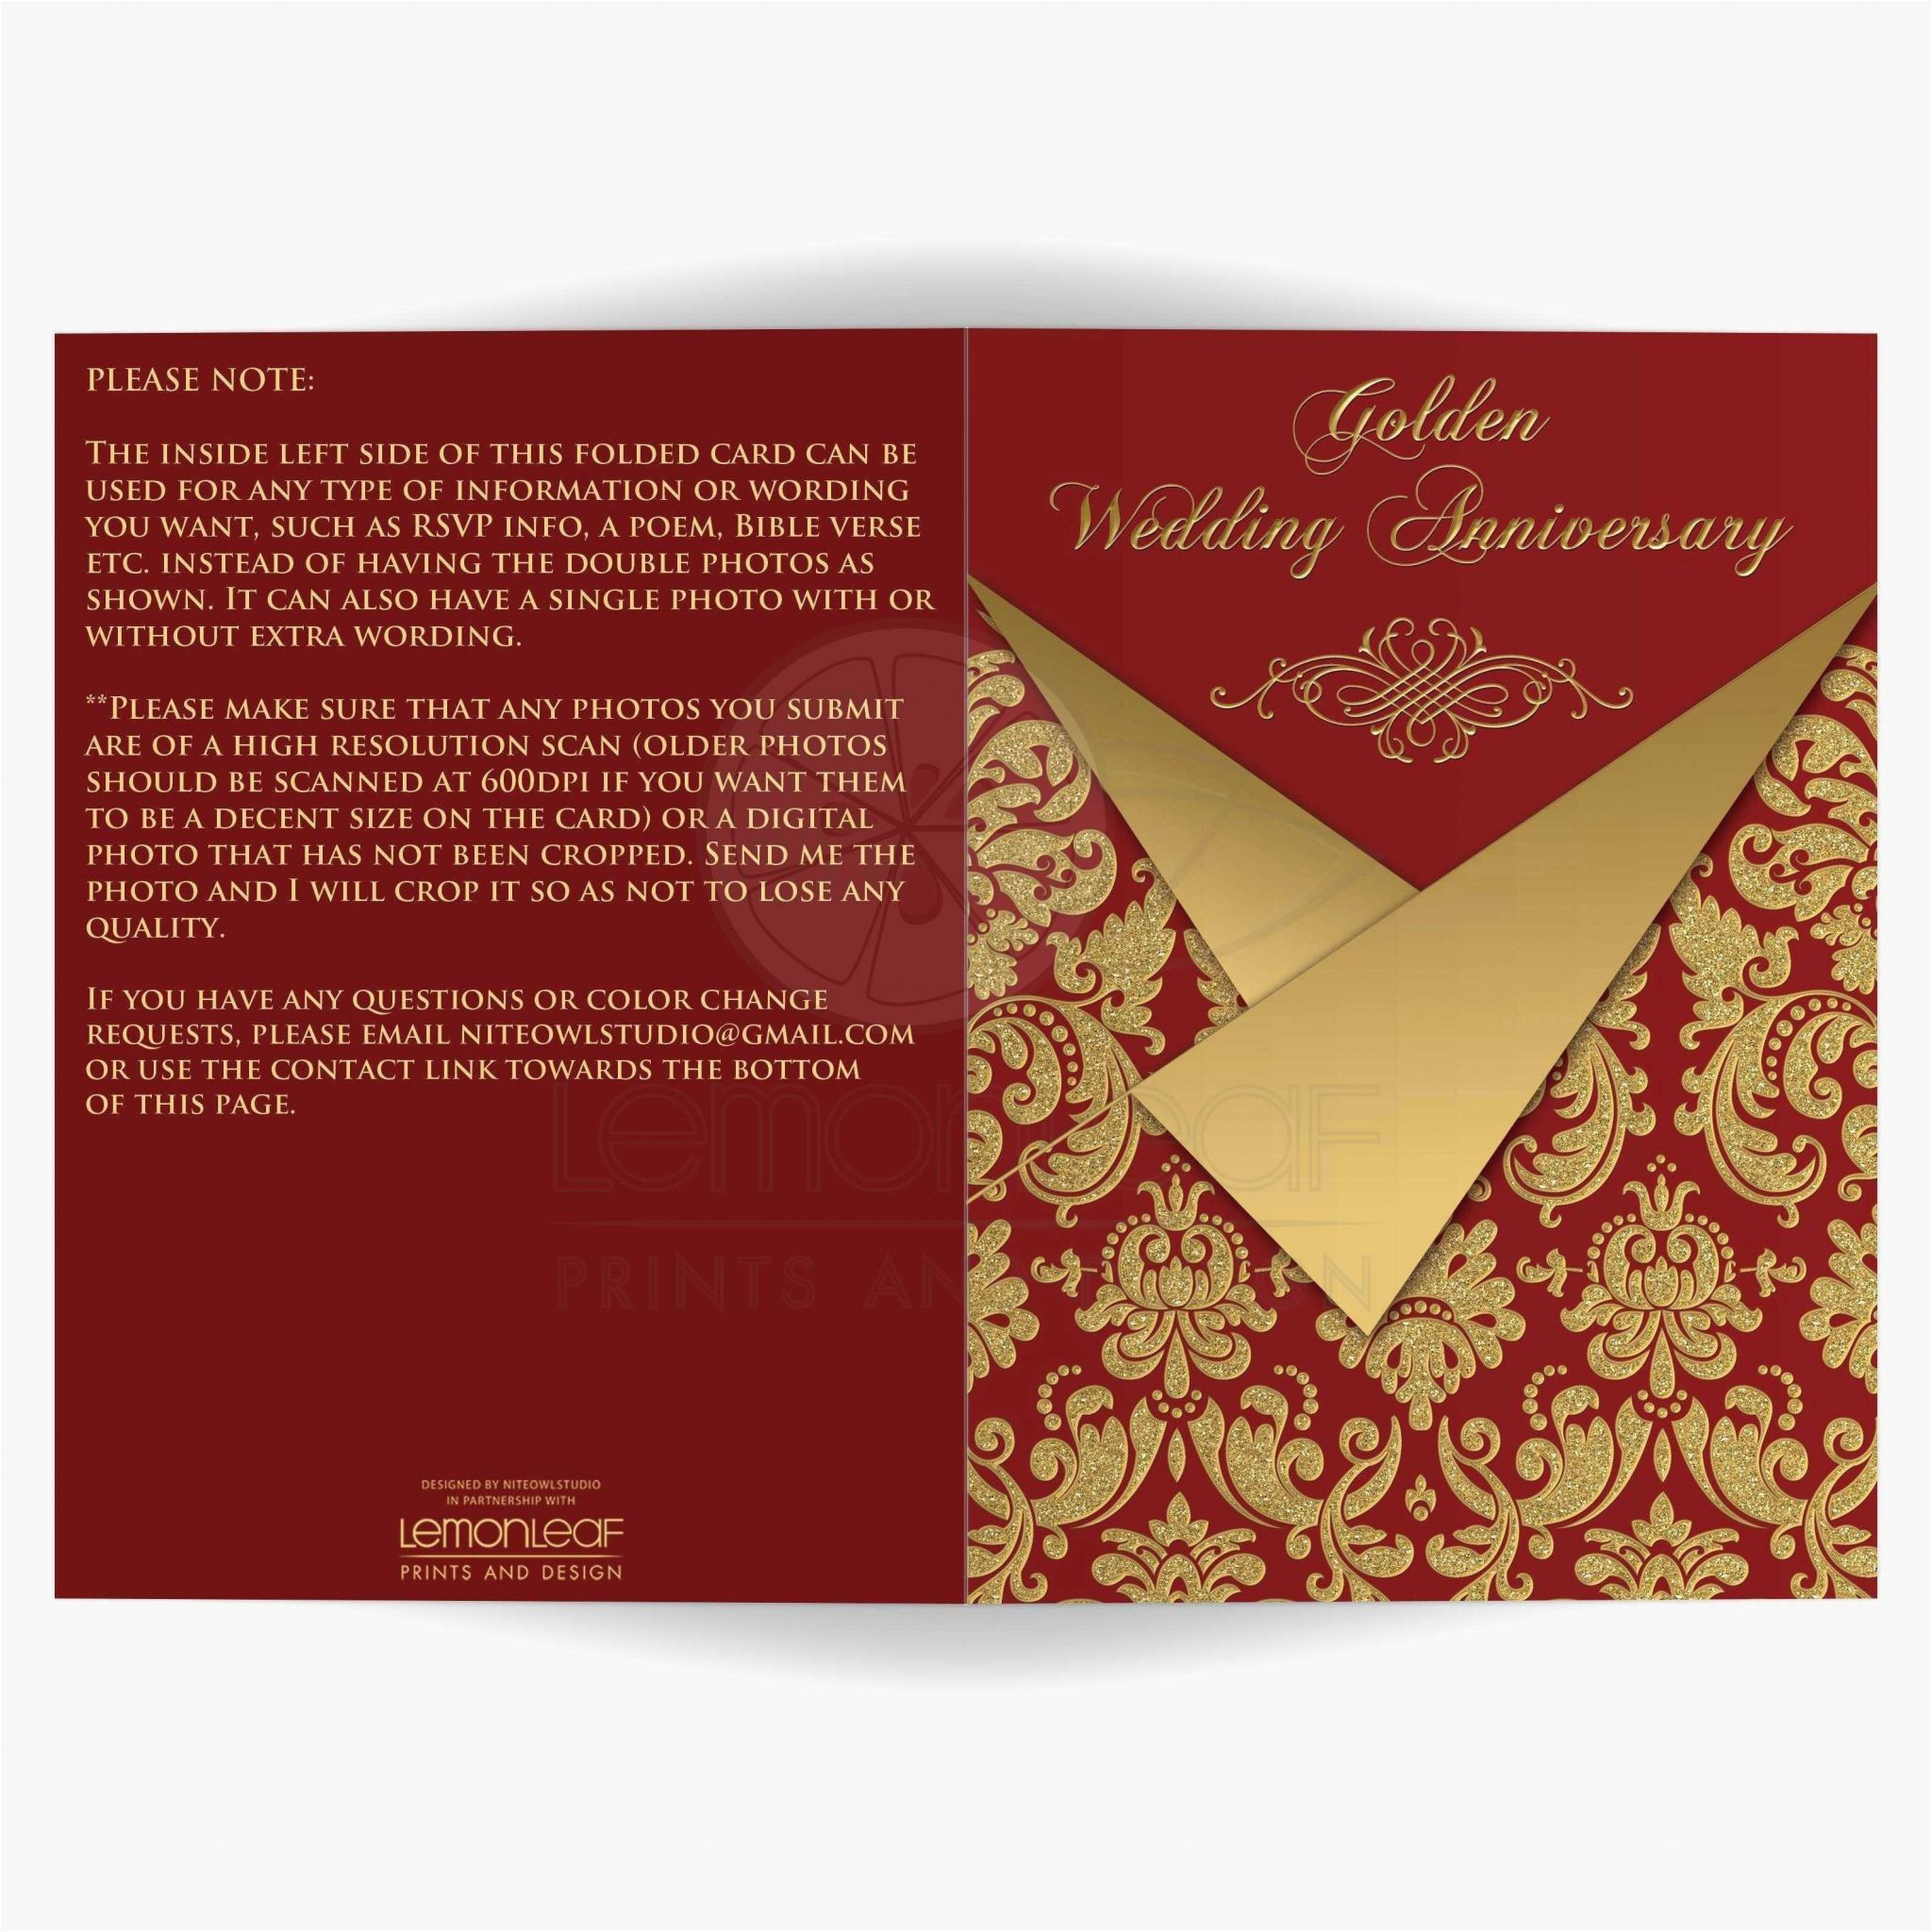 double sided invitations templates or double sided invitations templates lera mera business document of double sided invitations templates jpg